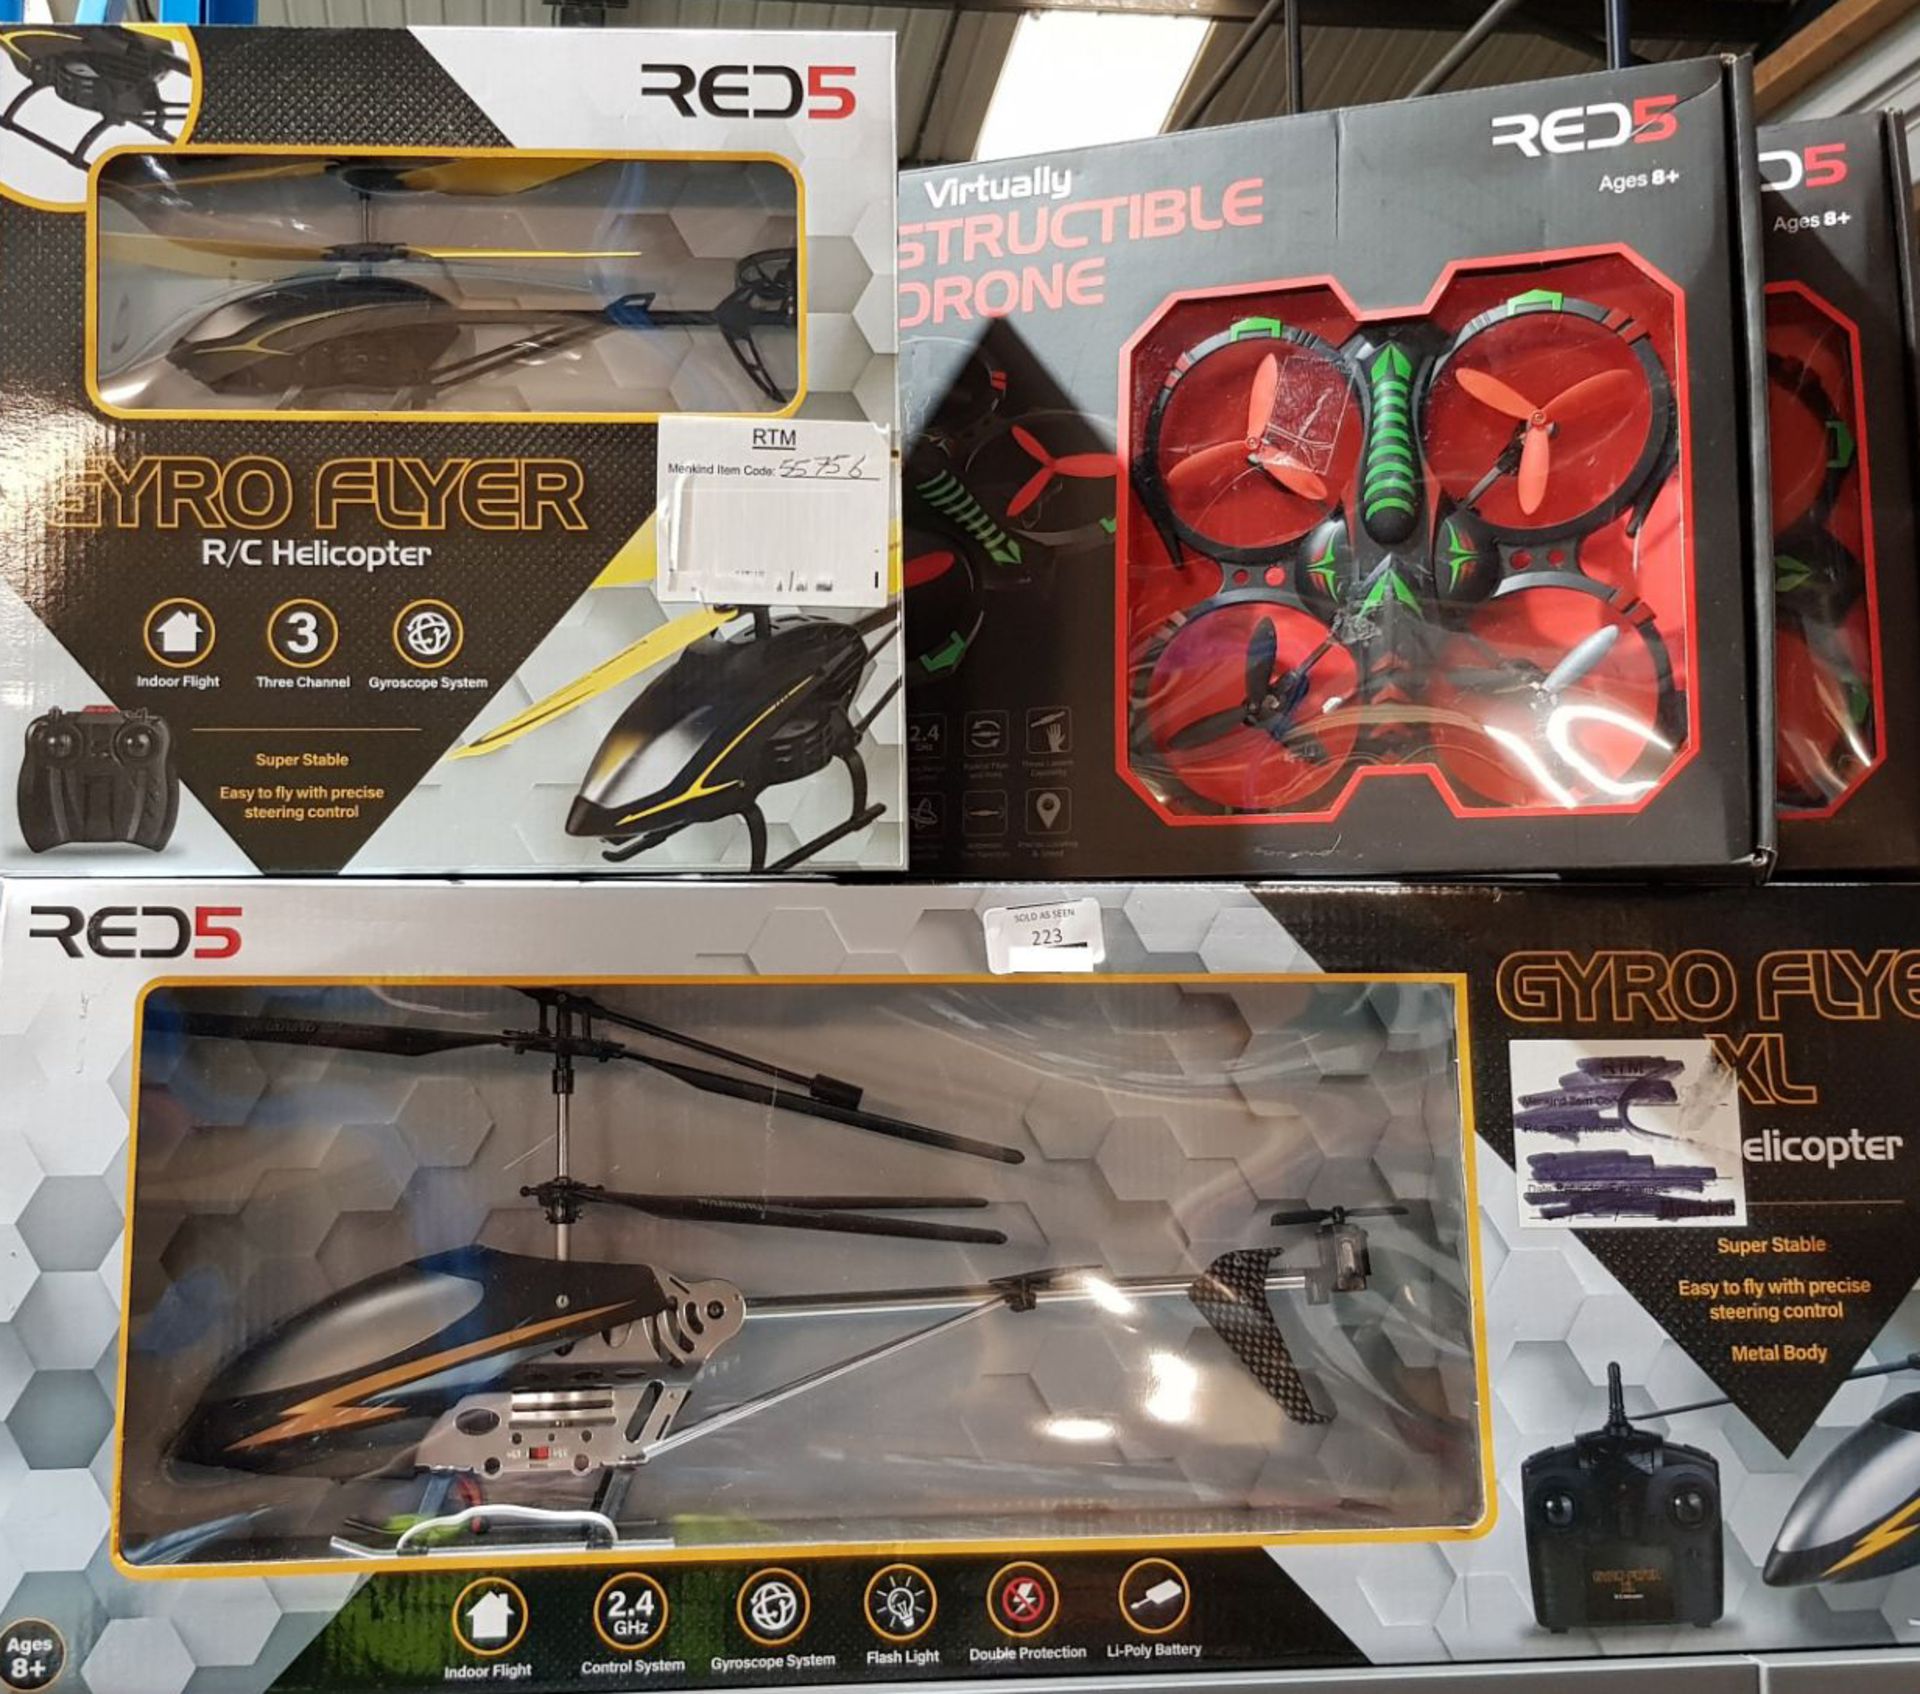 7 items 2 x red5 gyro flyer xl helicopter, 2 x red5 x-knight v2 extreme speed buggy, 2 x red5 amp